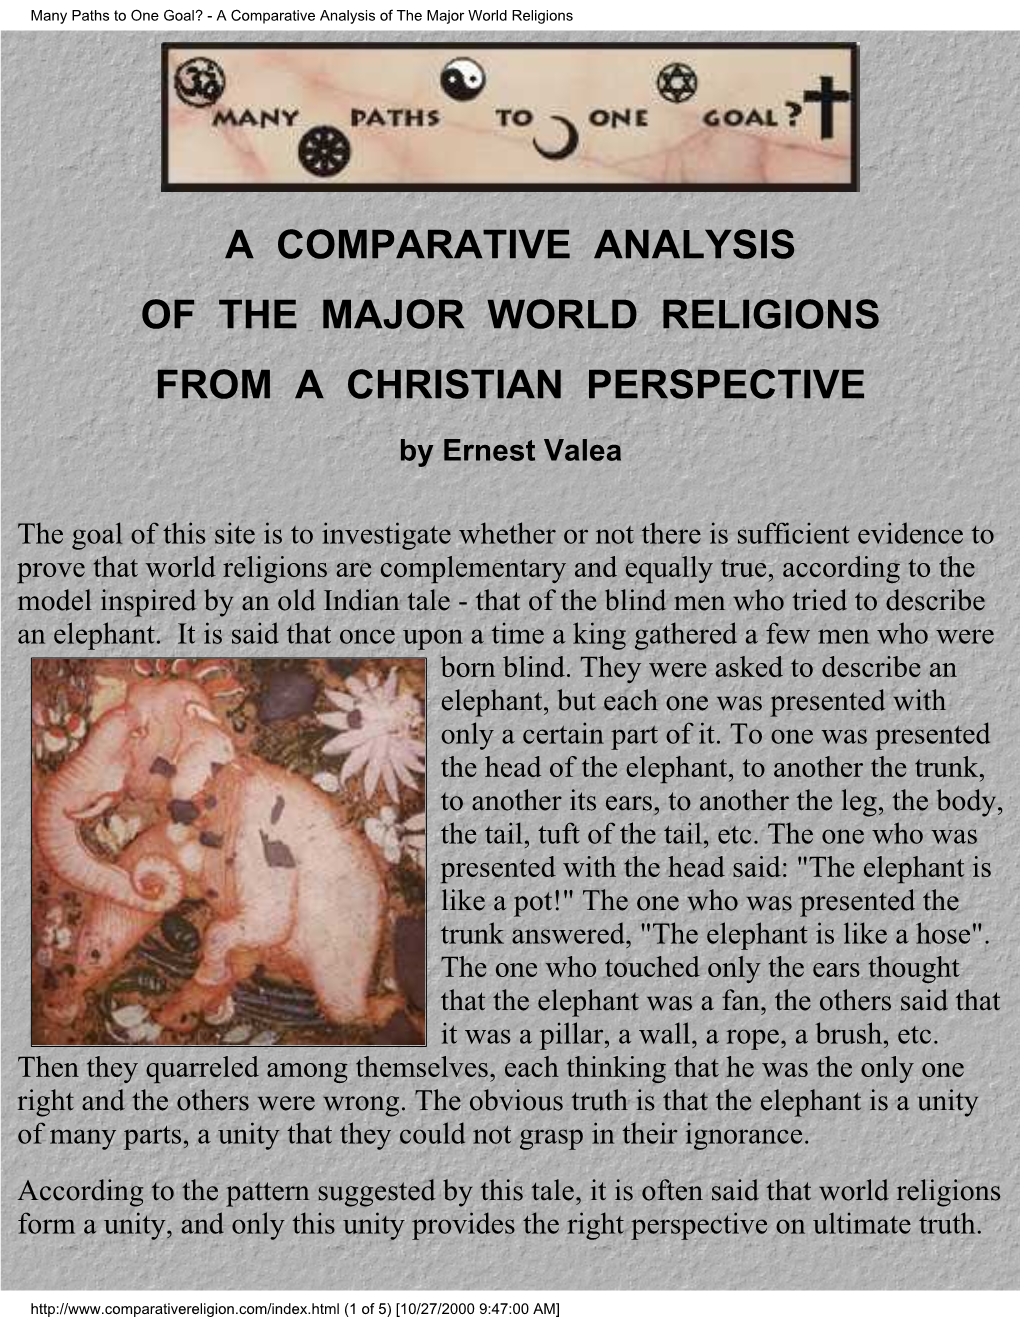 A Comparative Analysis of the Major World Religions